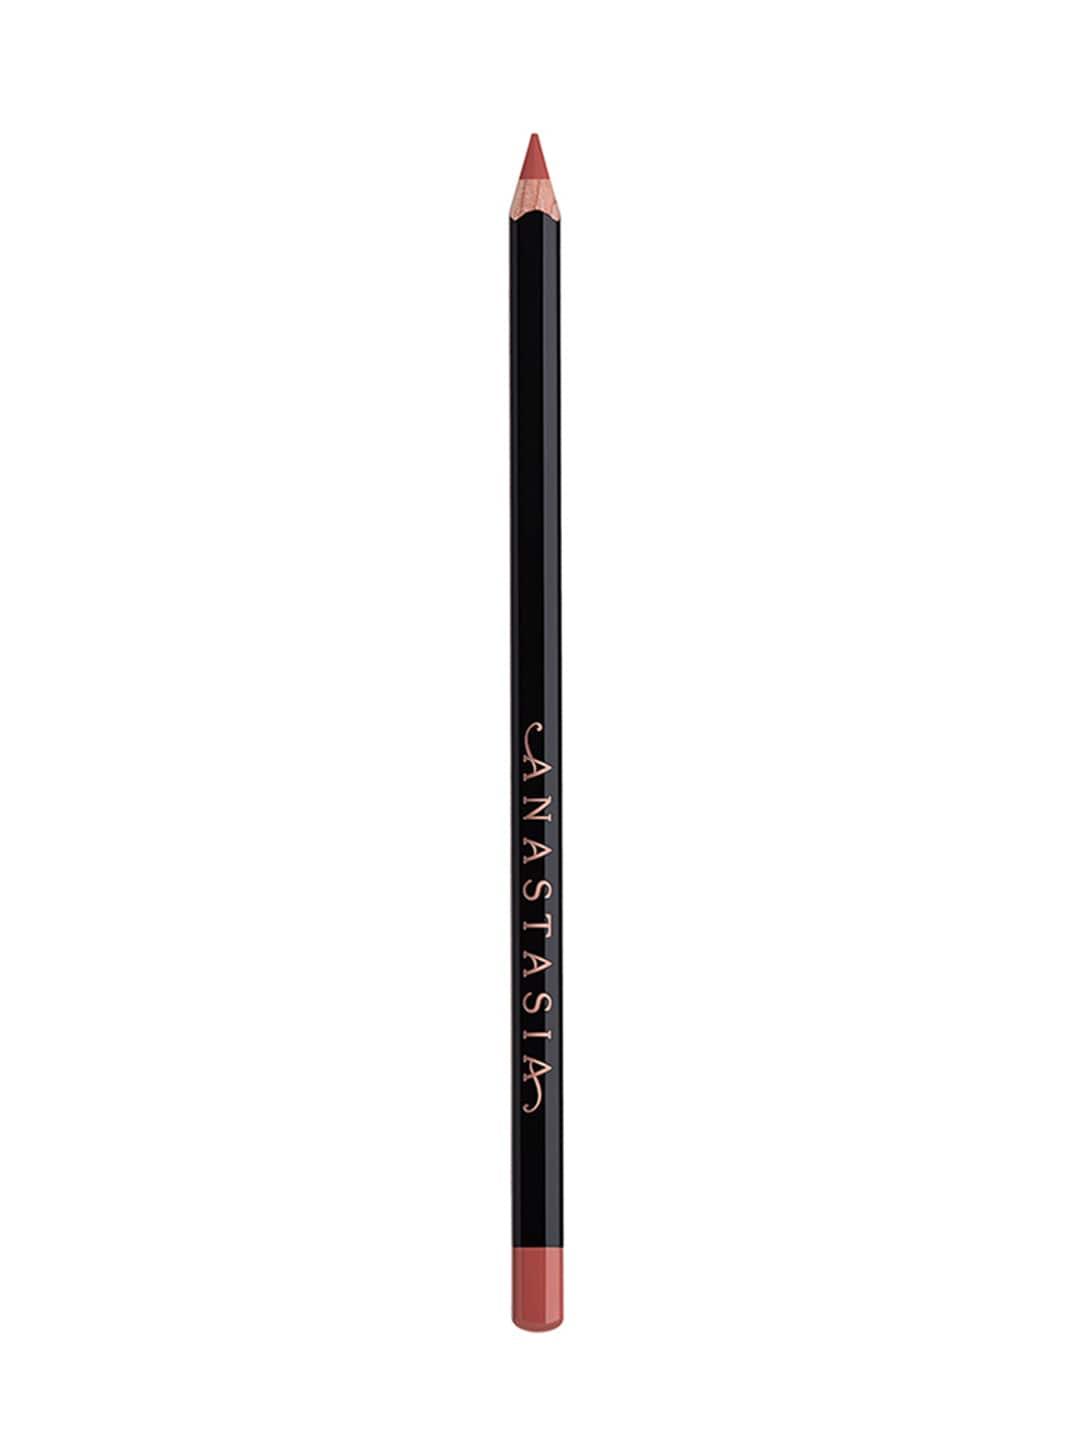 anastasia beverly hills full pigmented lip liner pencil - dusty rose